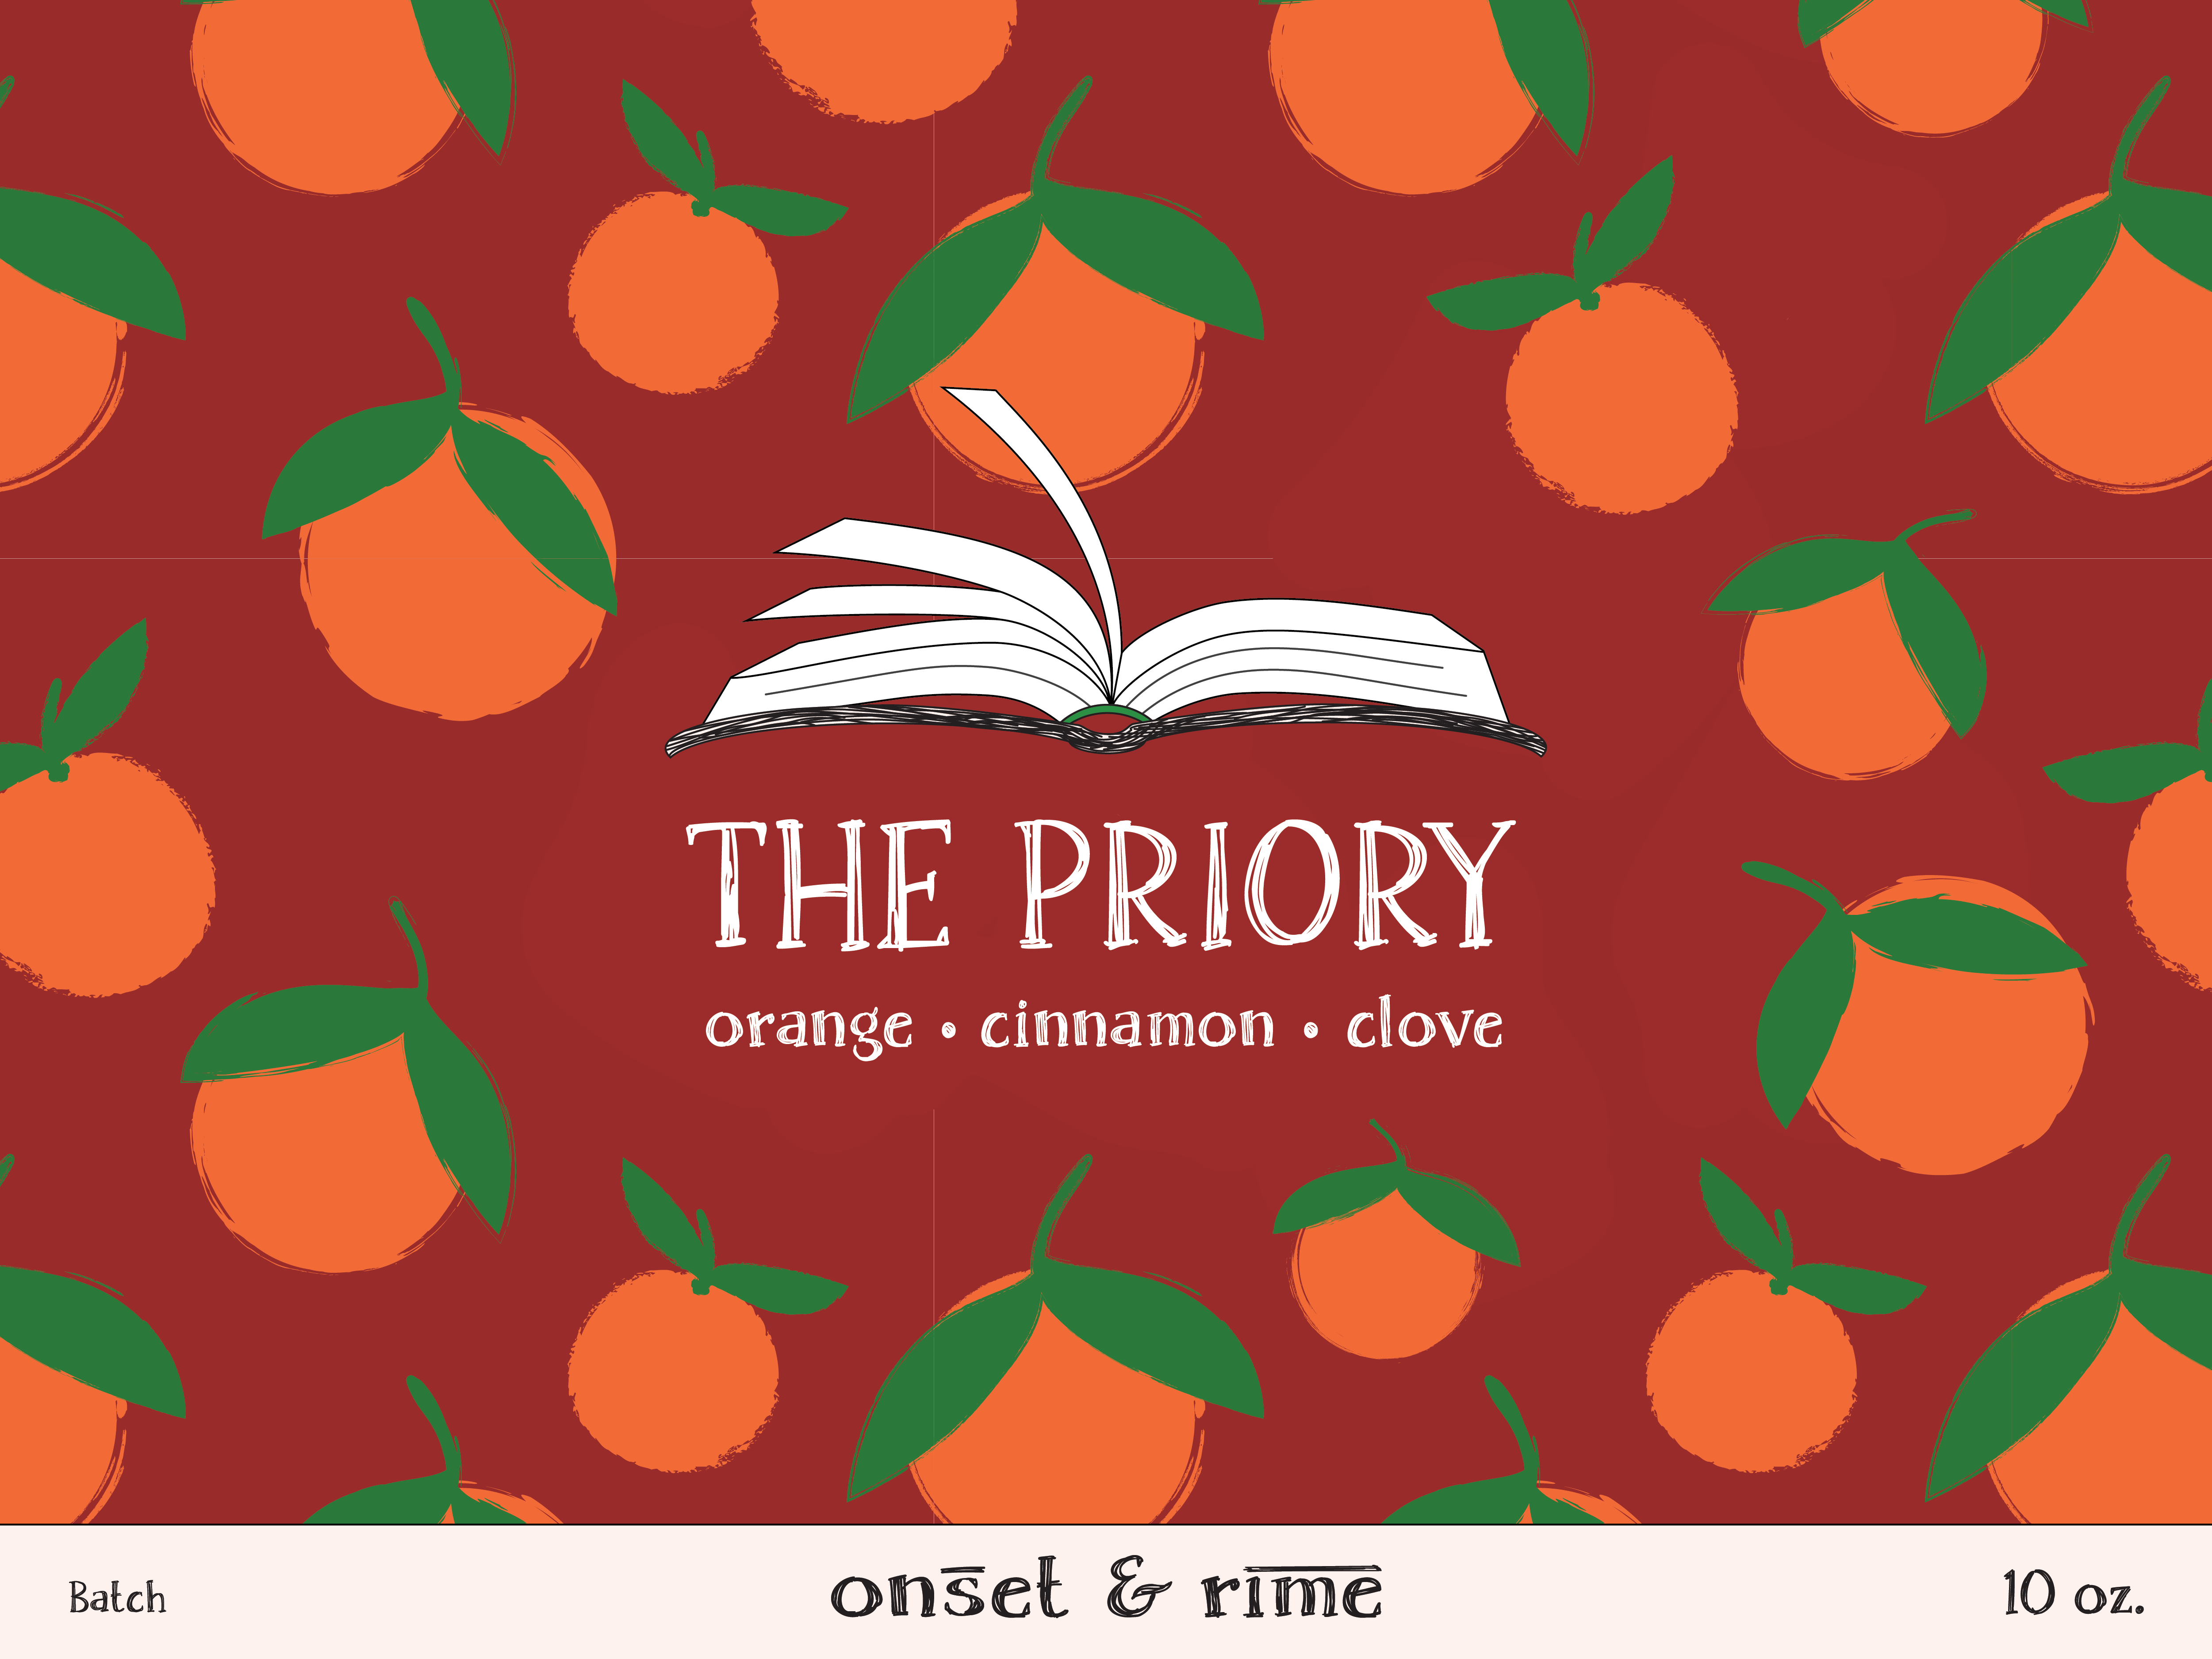 A close up view of the label for the Onset & Rime spiced orange scented candle called "The Priory". The label is red with a pattern of oranges. The text on the label is "The Priory - Orange, Cinnamon, Clove".